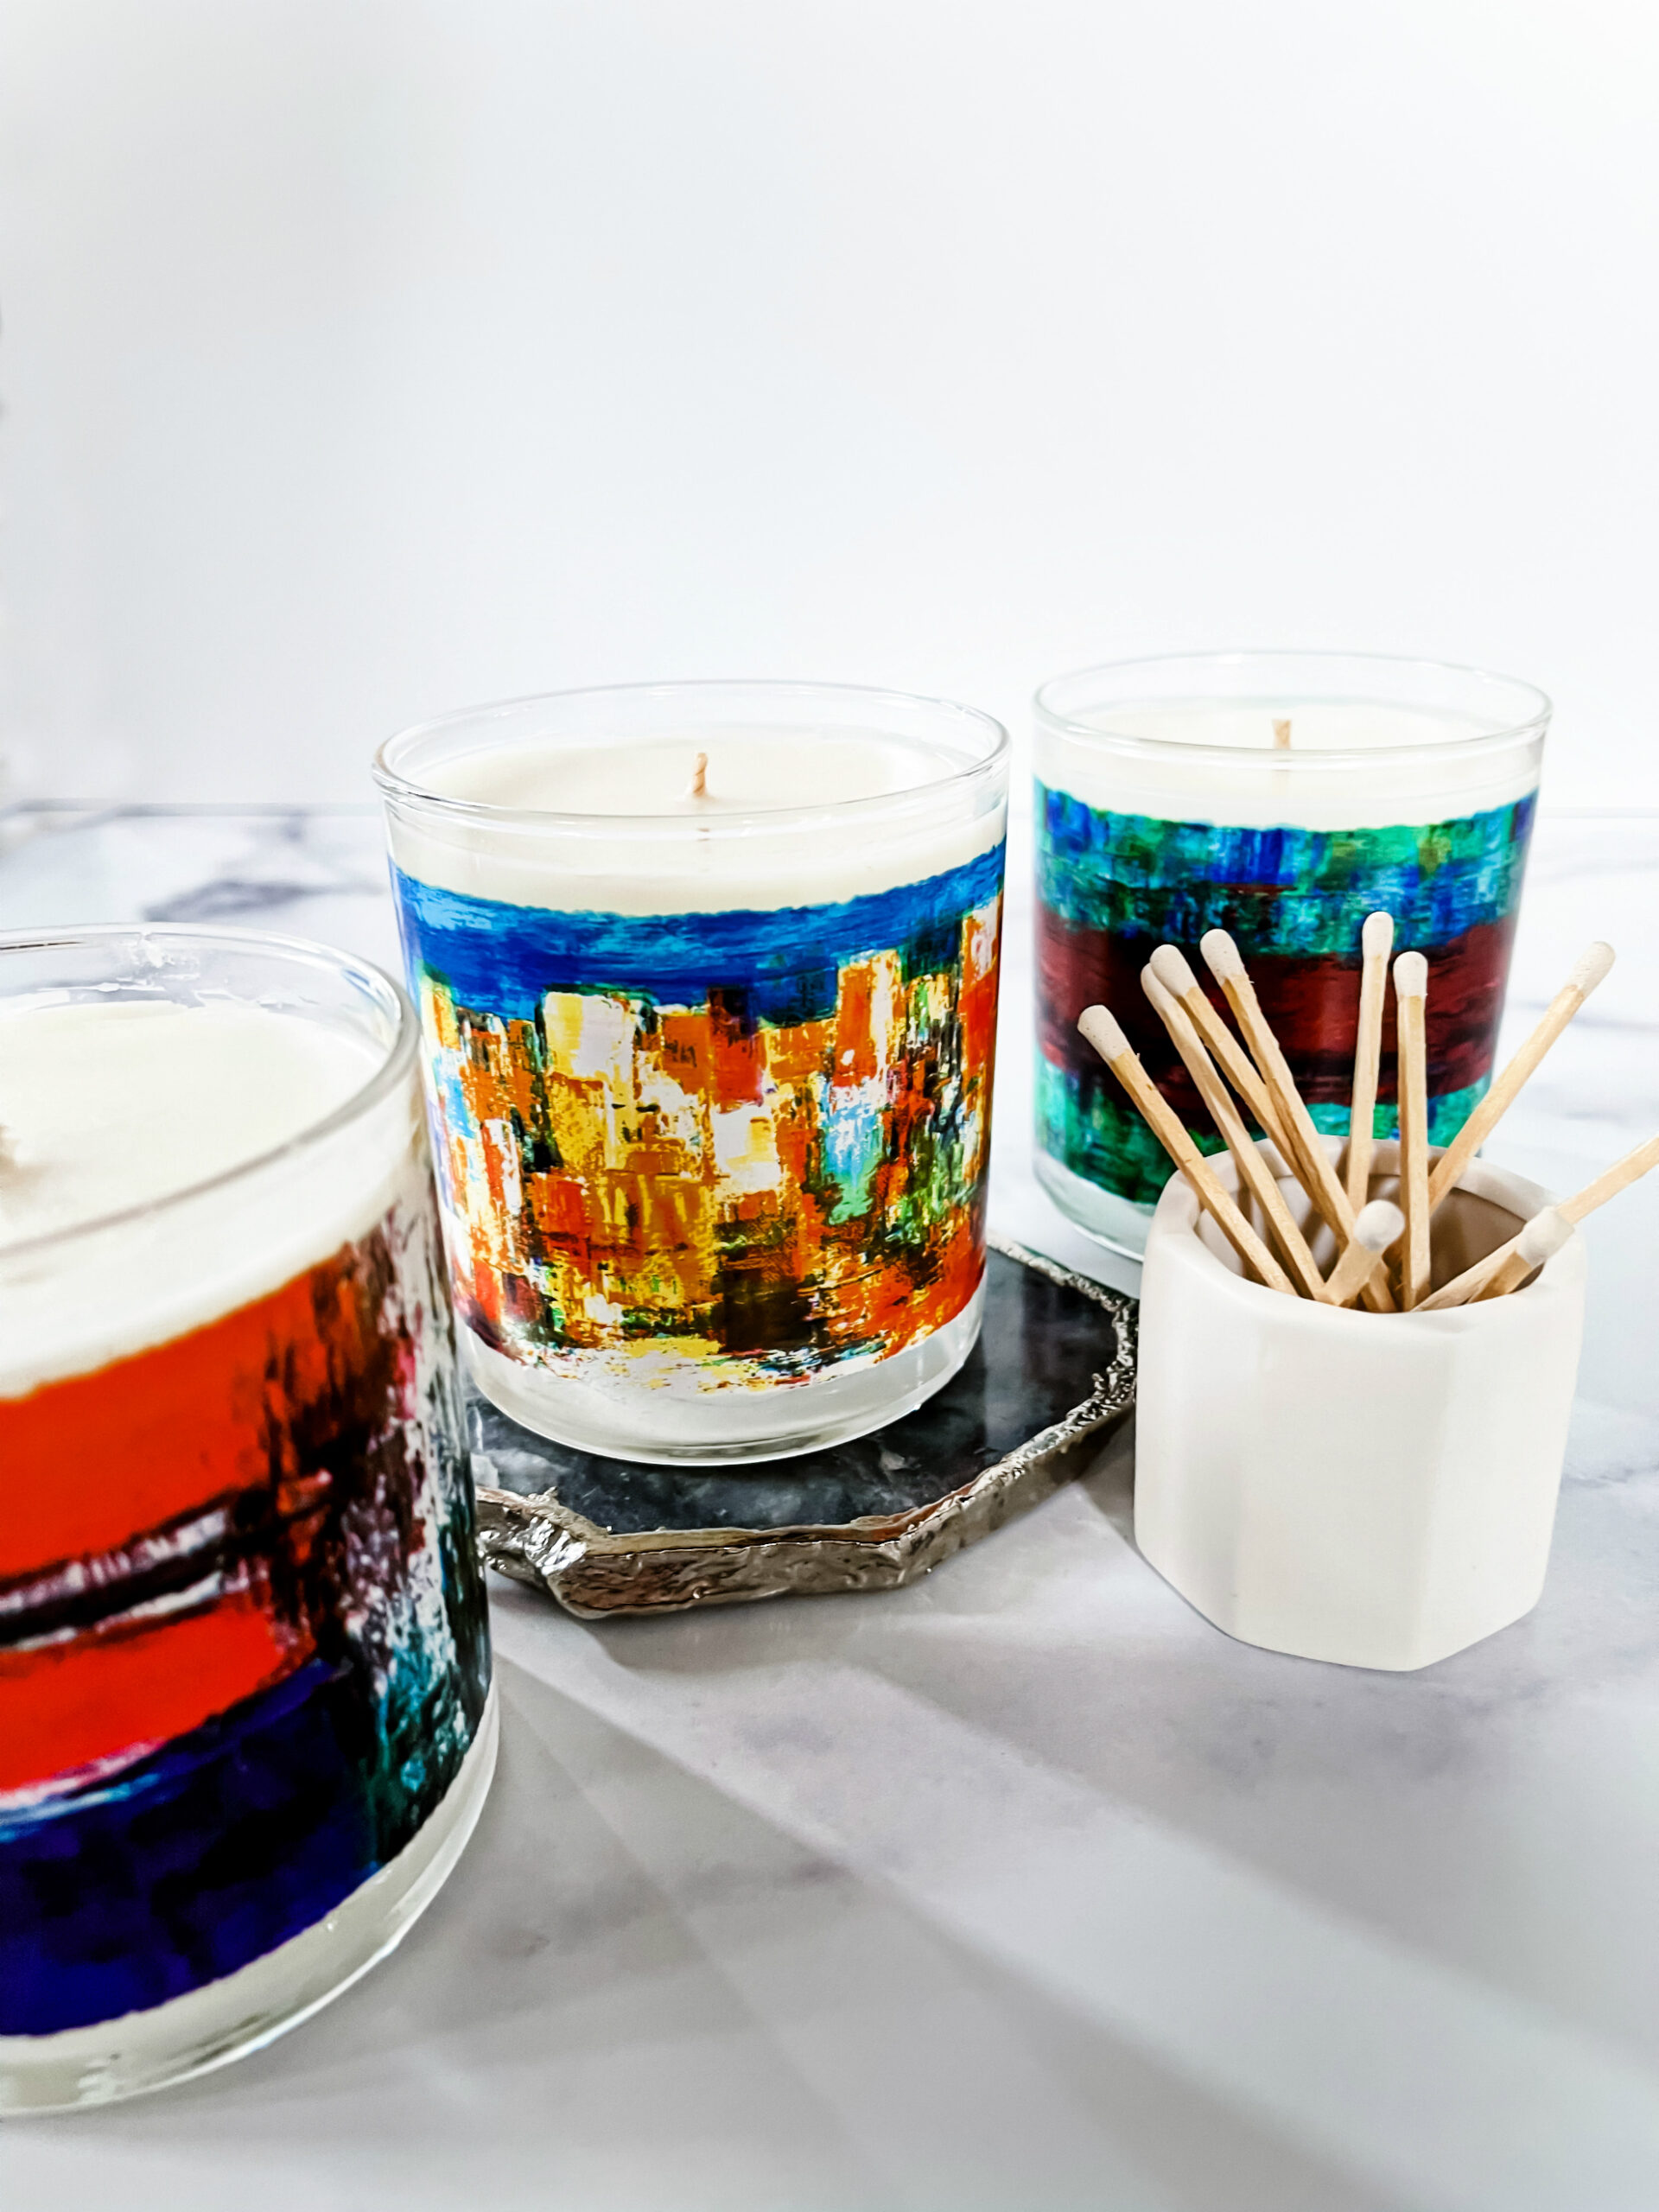 Artistscent Fragrance Candles, Candle Styling In Home, Candle Decor, Ronnie Queenan, Cityscape Candle